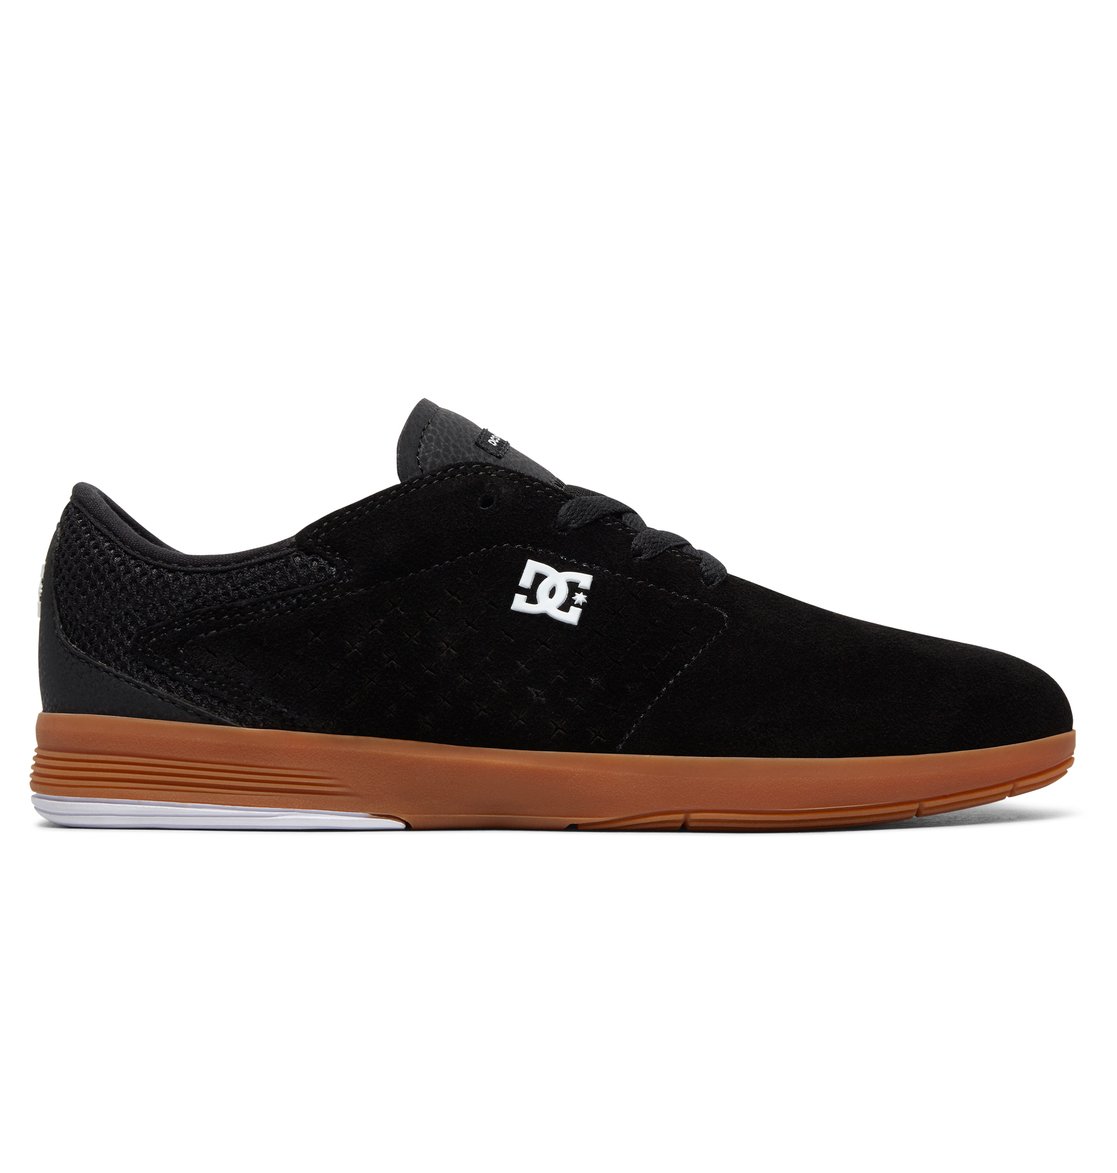 new dc skate shoes